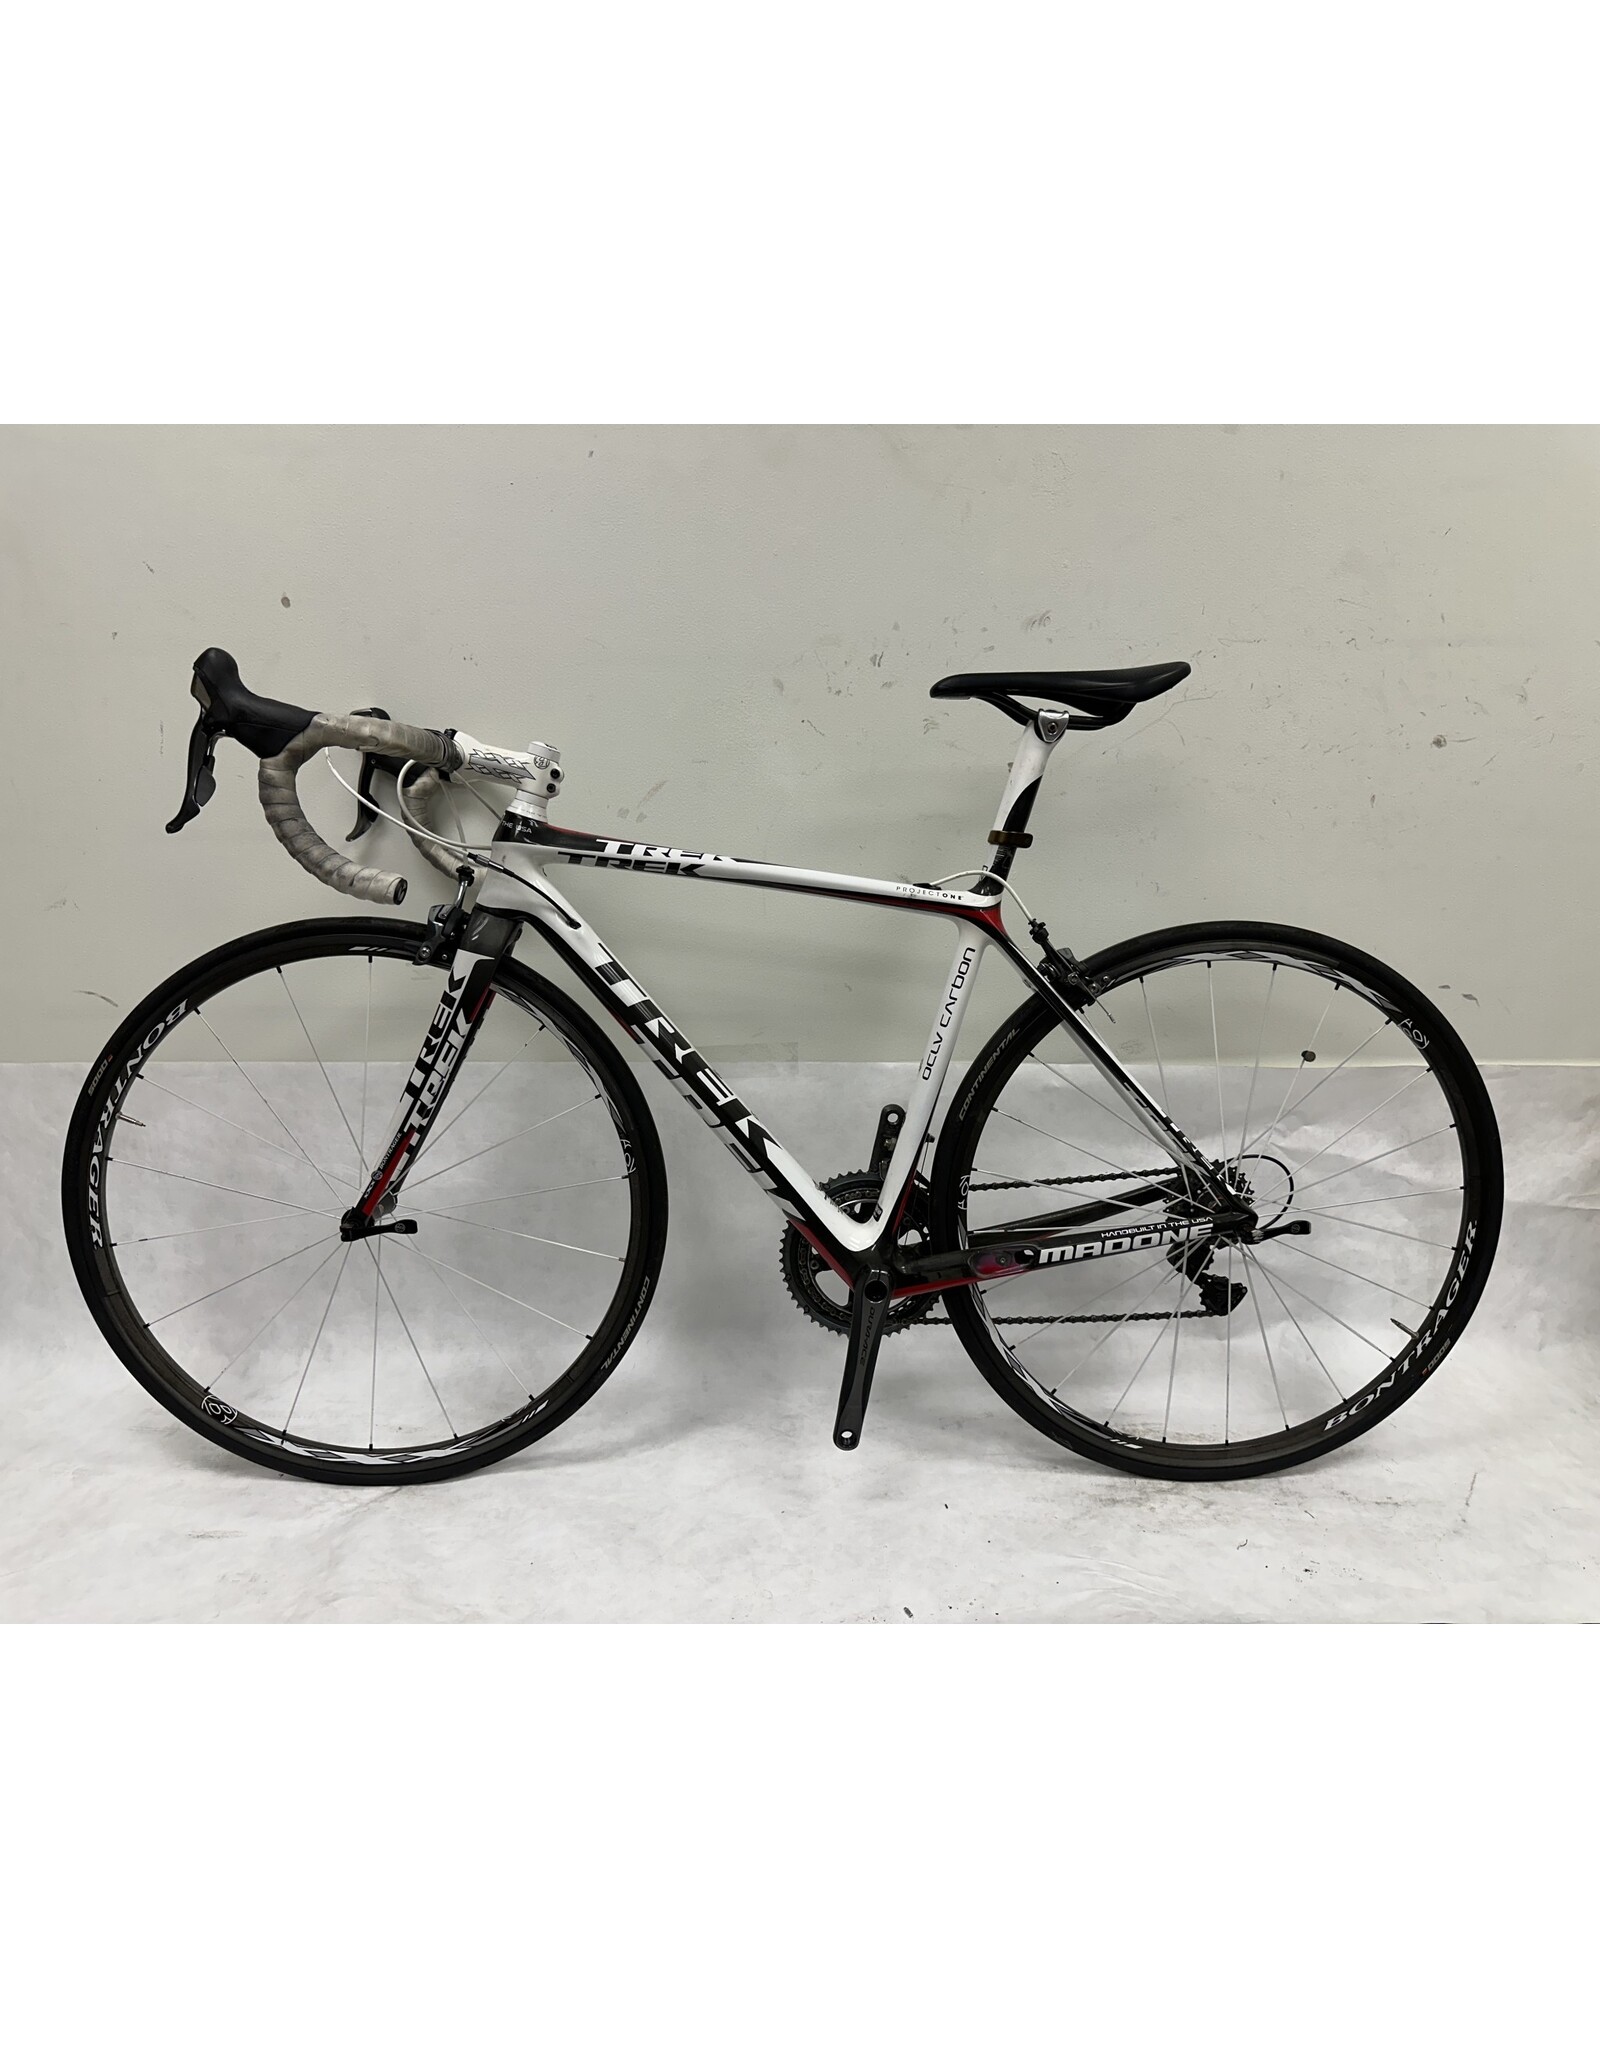 Trek Madone Project One 2010 Dura Ace